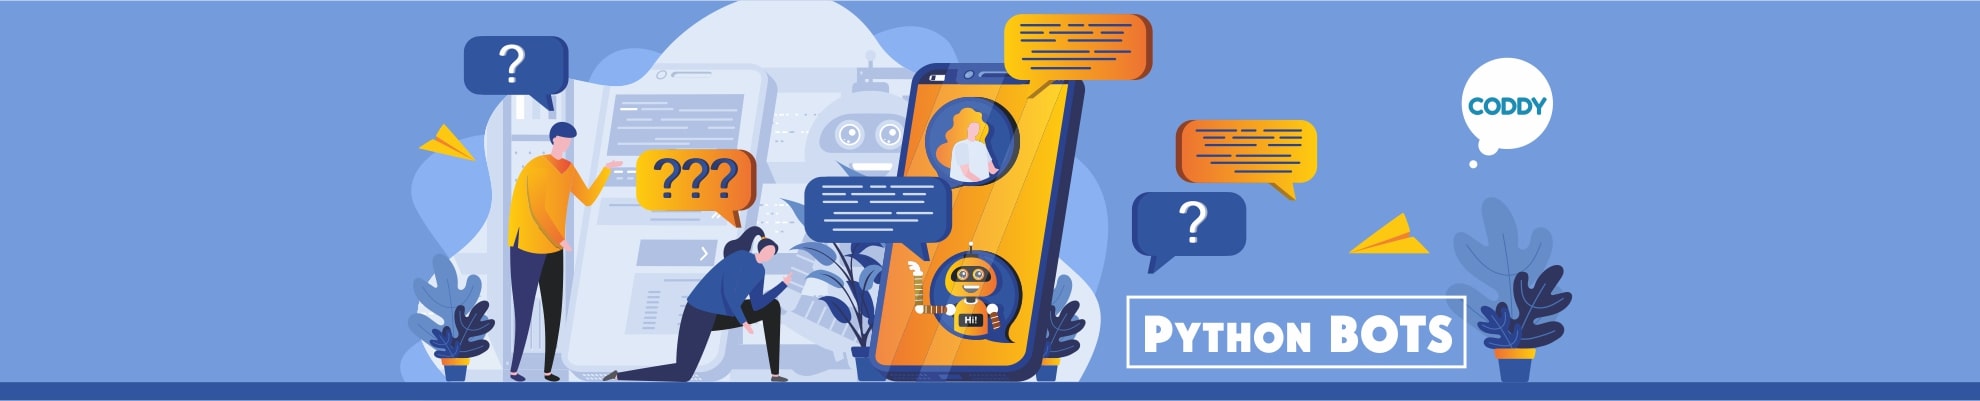 Course Python Bots Coddy Programming School For Kids In Moscow - ai bots roblox